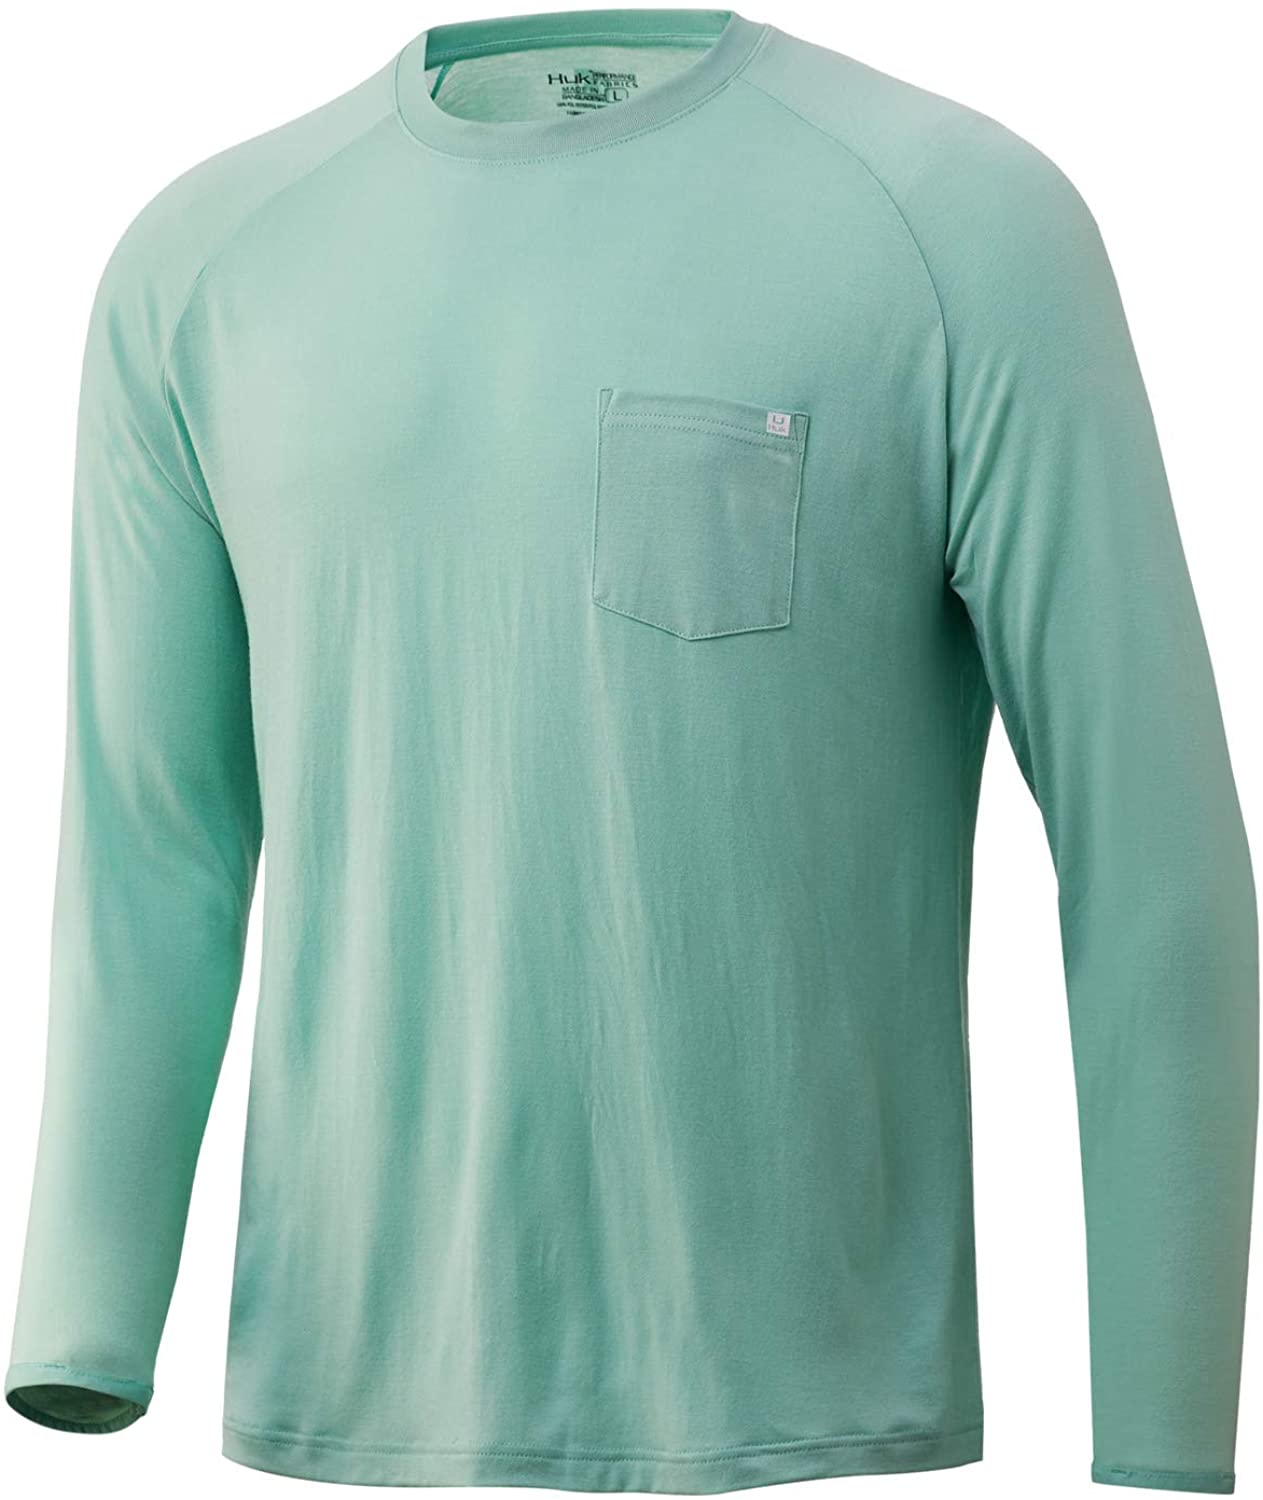 Men's Huk Waypoint Long Sleeve Shirt in Lichen from the front